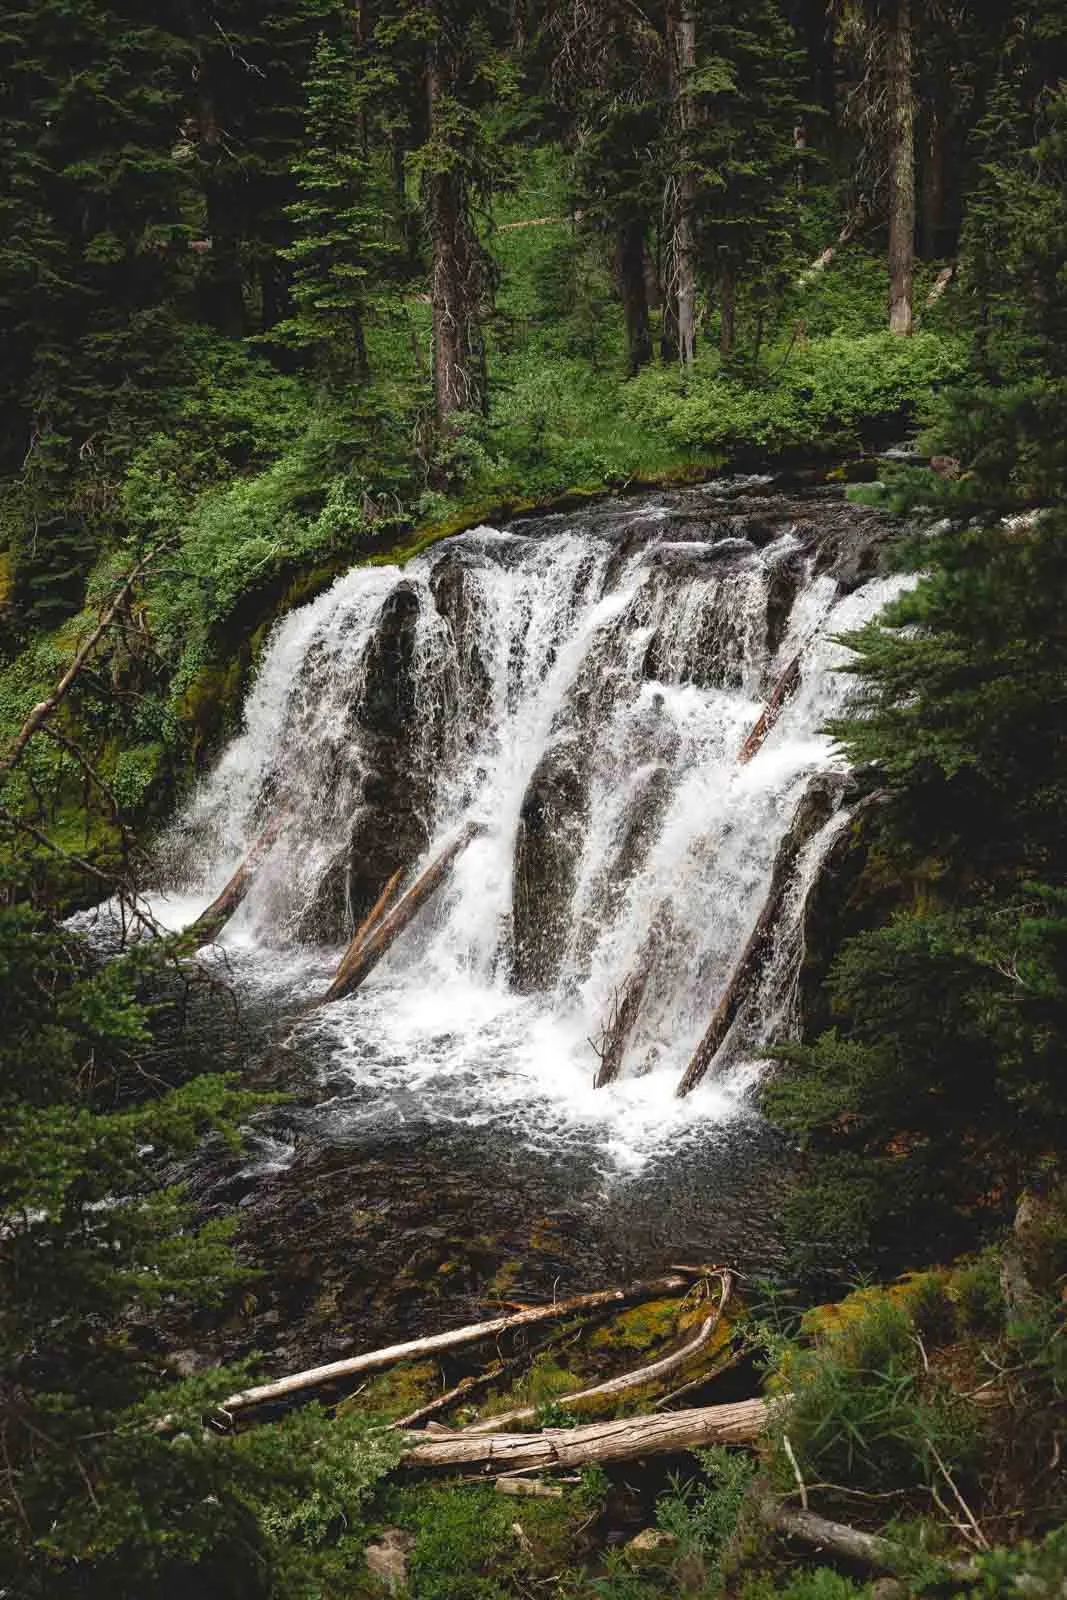 You won't be disappointed by your Tumalo Falls hike!